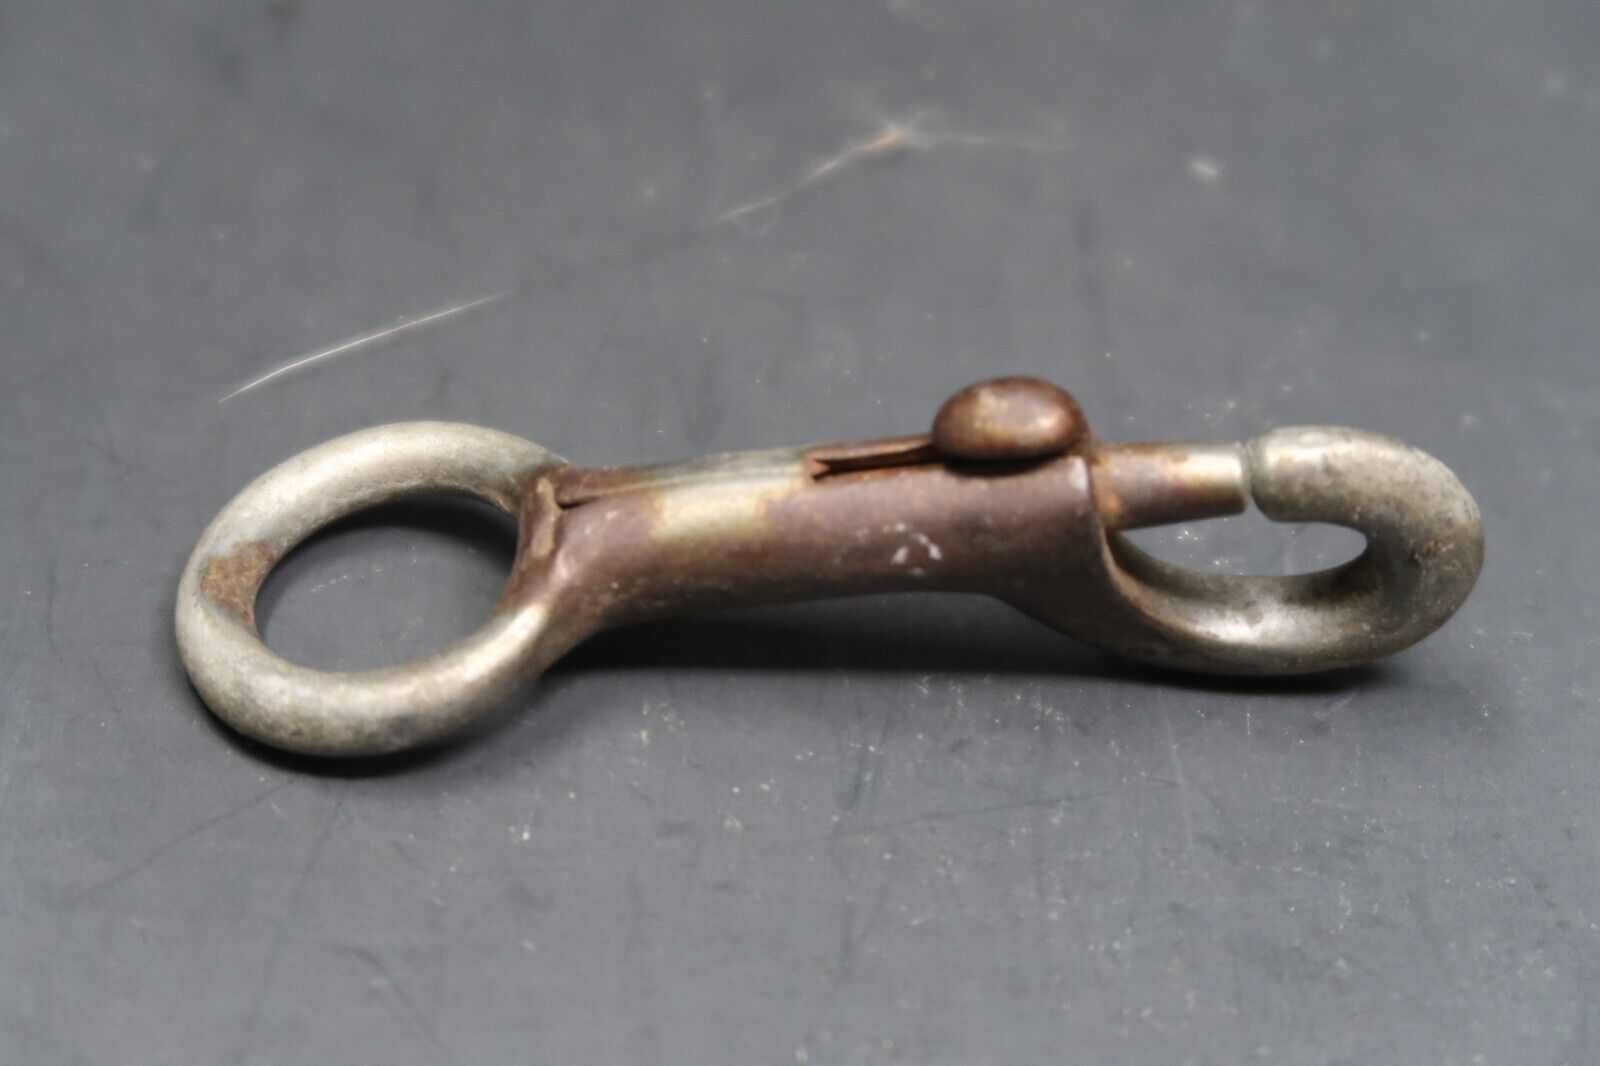 Vintage Steel Bolt Snap Hook With Fixed Eye 3.5"